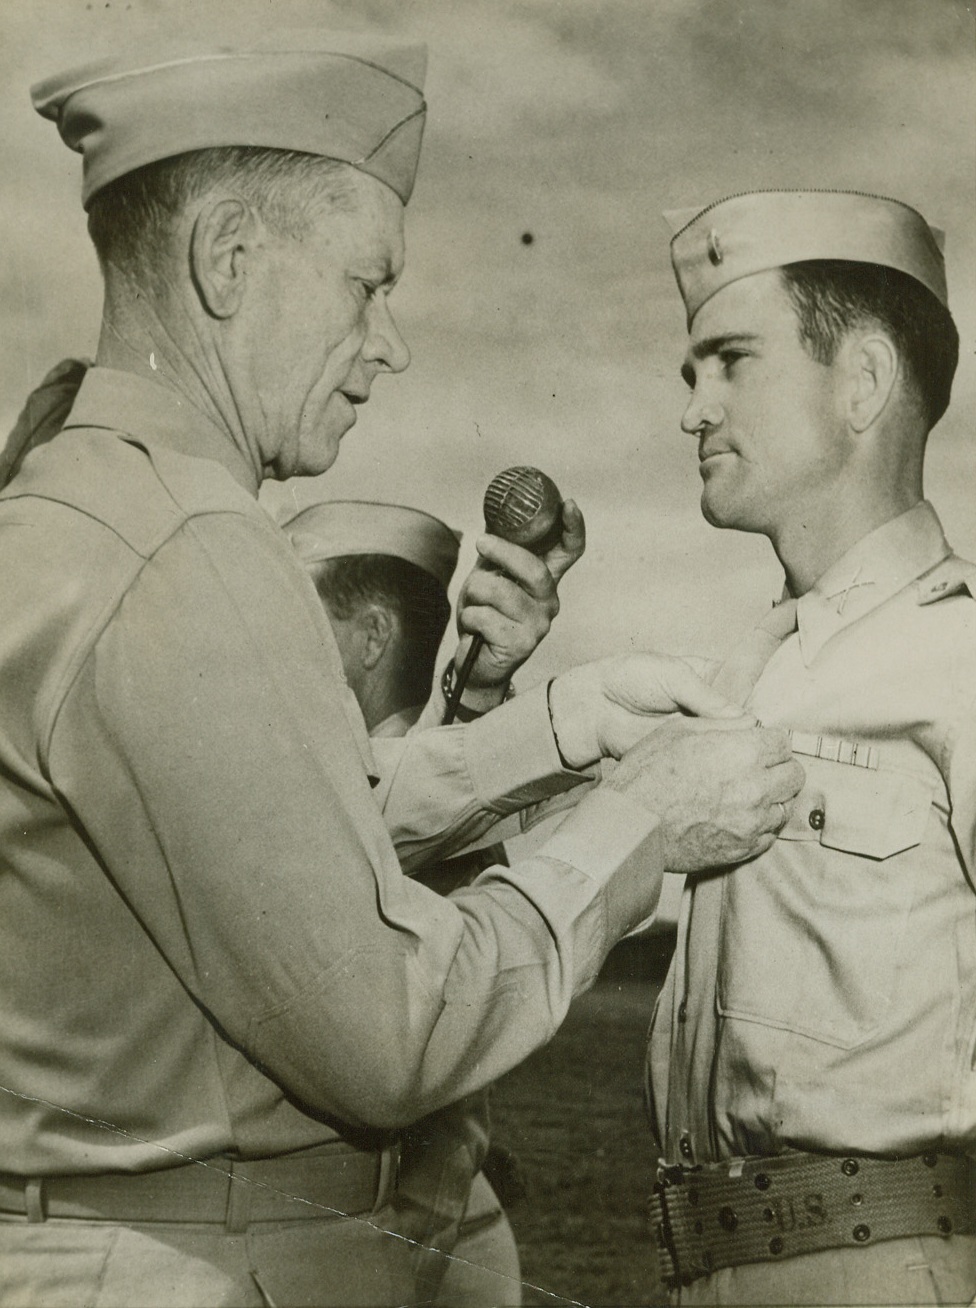 No Title. 12/29/1943. First Lieut. Thomas D. Hindmen, May, Tex., receives the Silver Star decoration for gallantry in action from Maj. Gen. Charles H. Corlett. His mother lives in May, Texas, where the lieutenant was born. His wife, Mary, lives at Carmel, Calif.;